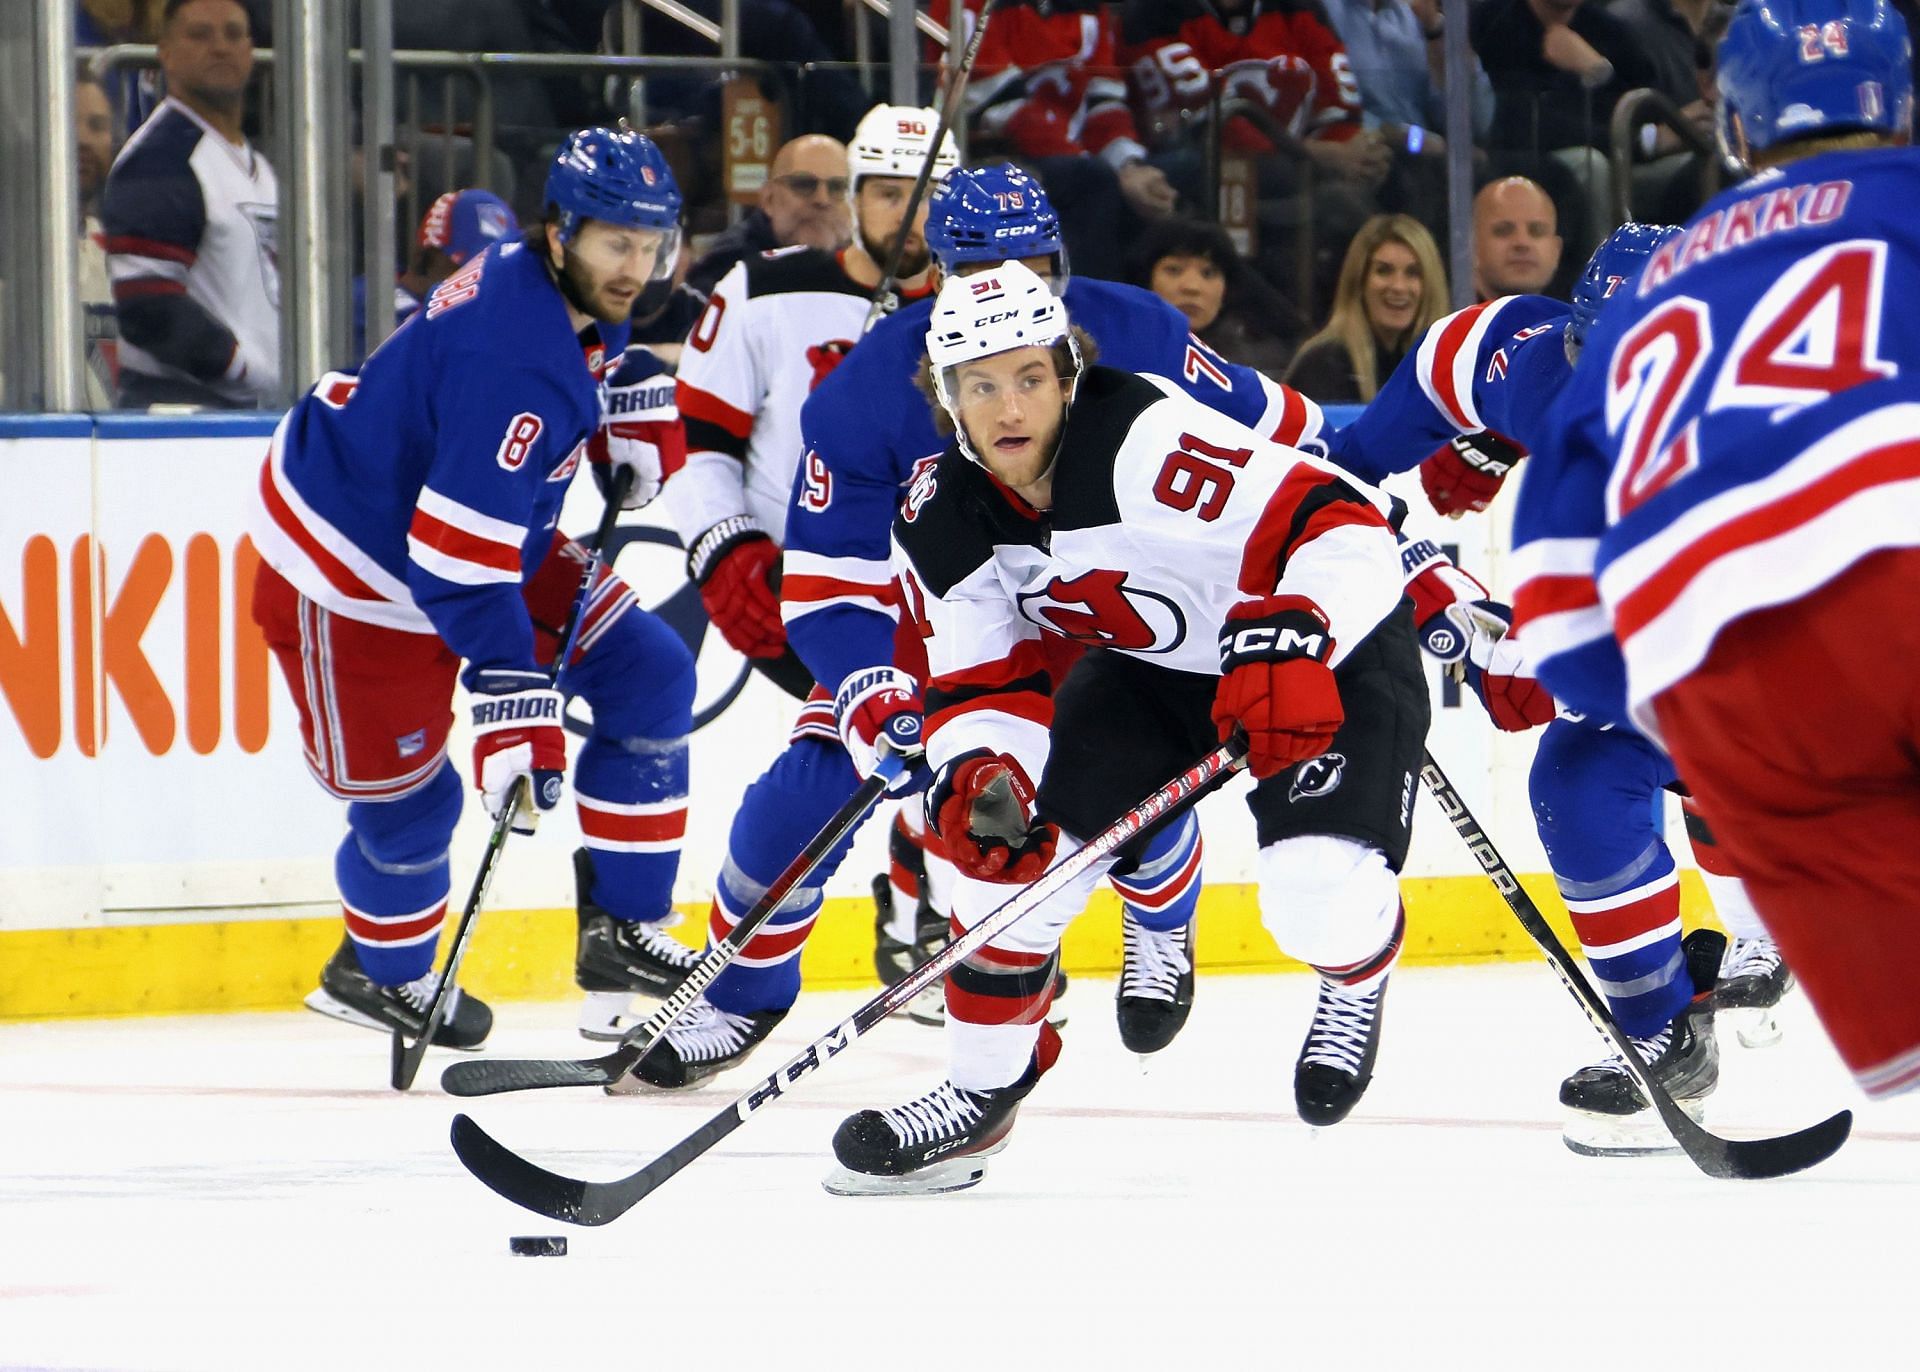 Game Preview: New Jersey Devils at New York Rangers - All About